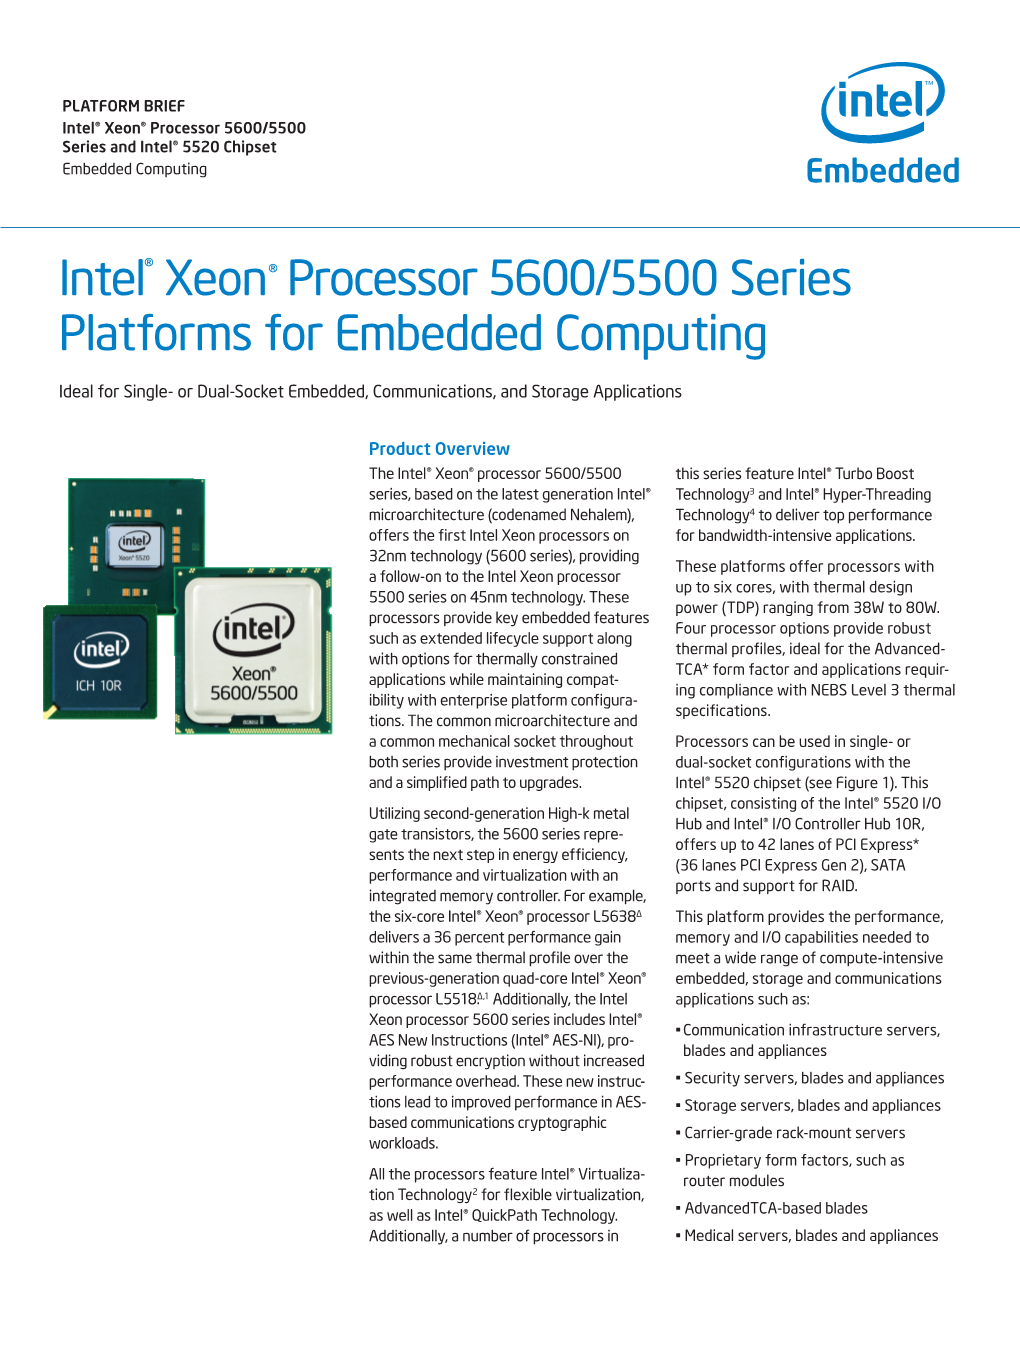 Intel Xeon Processor 5600/5500 Series Platforms for Embedded